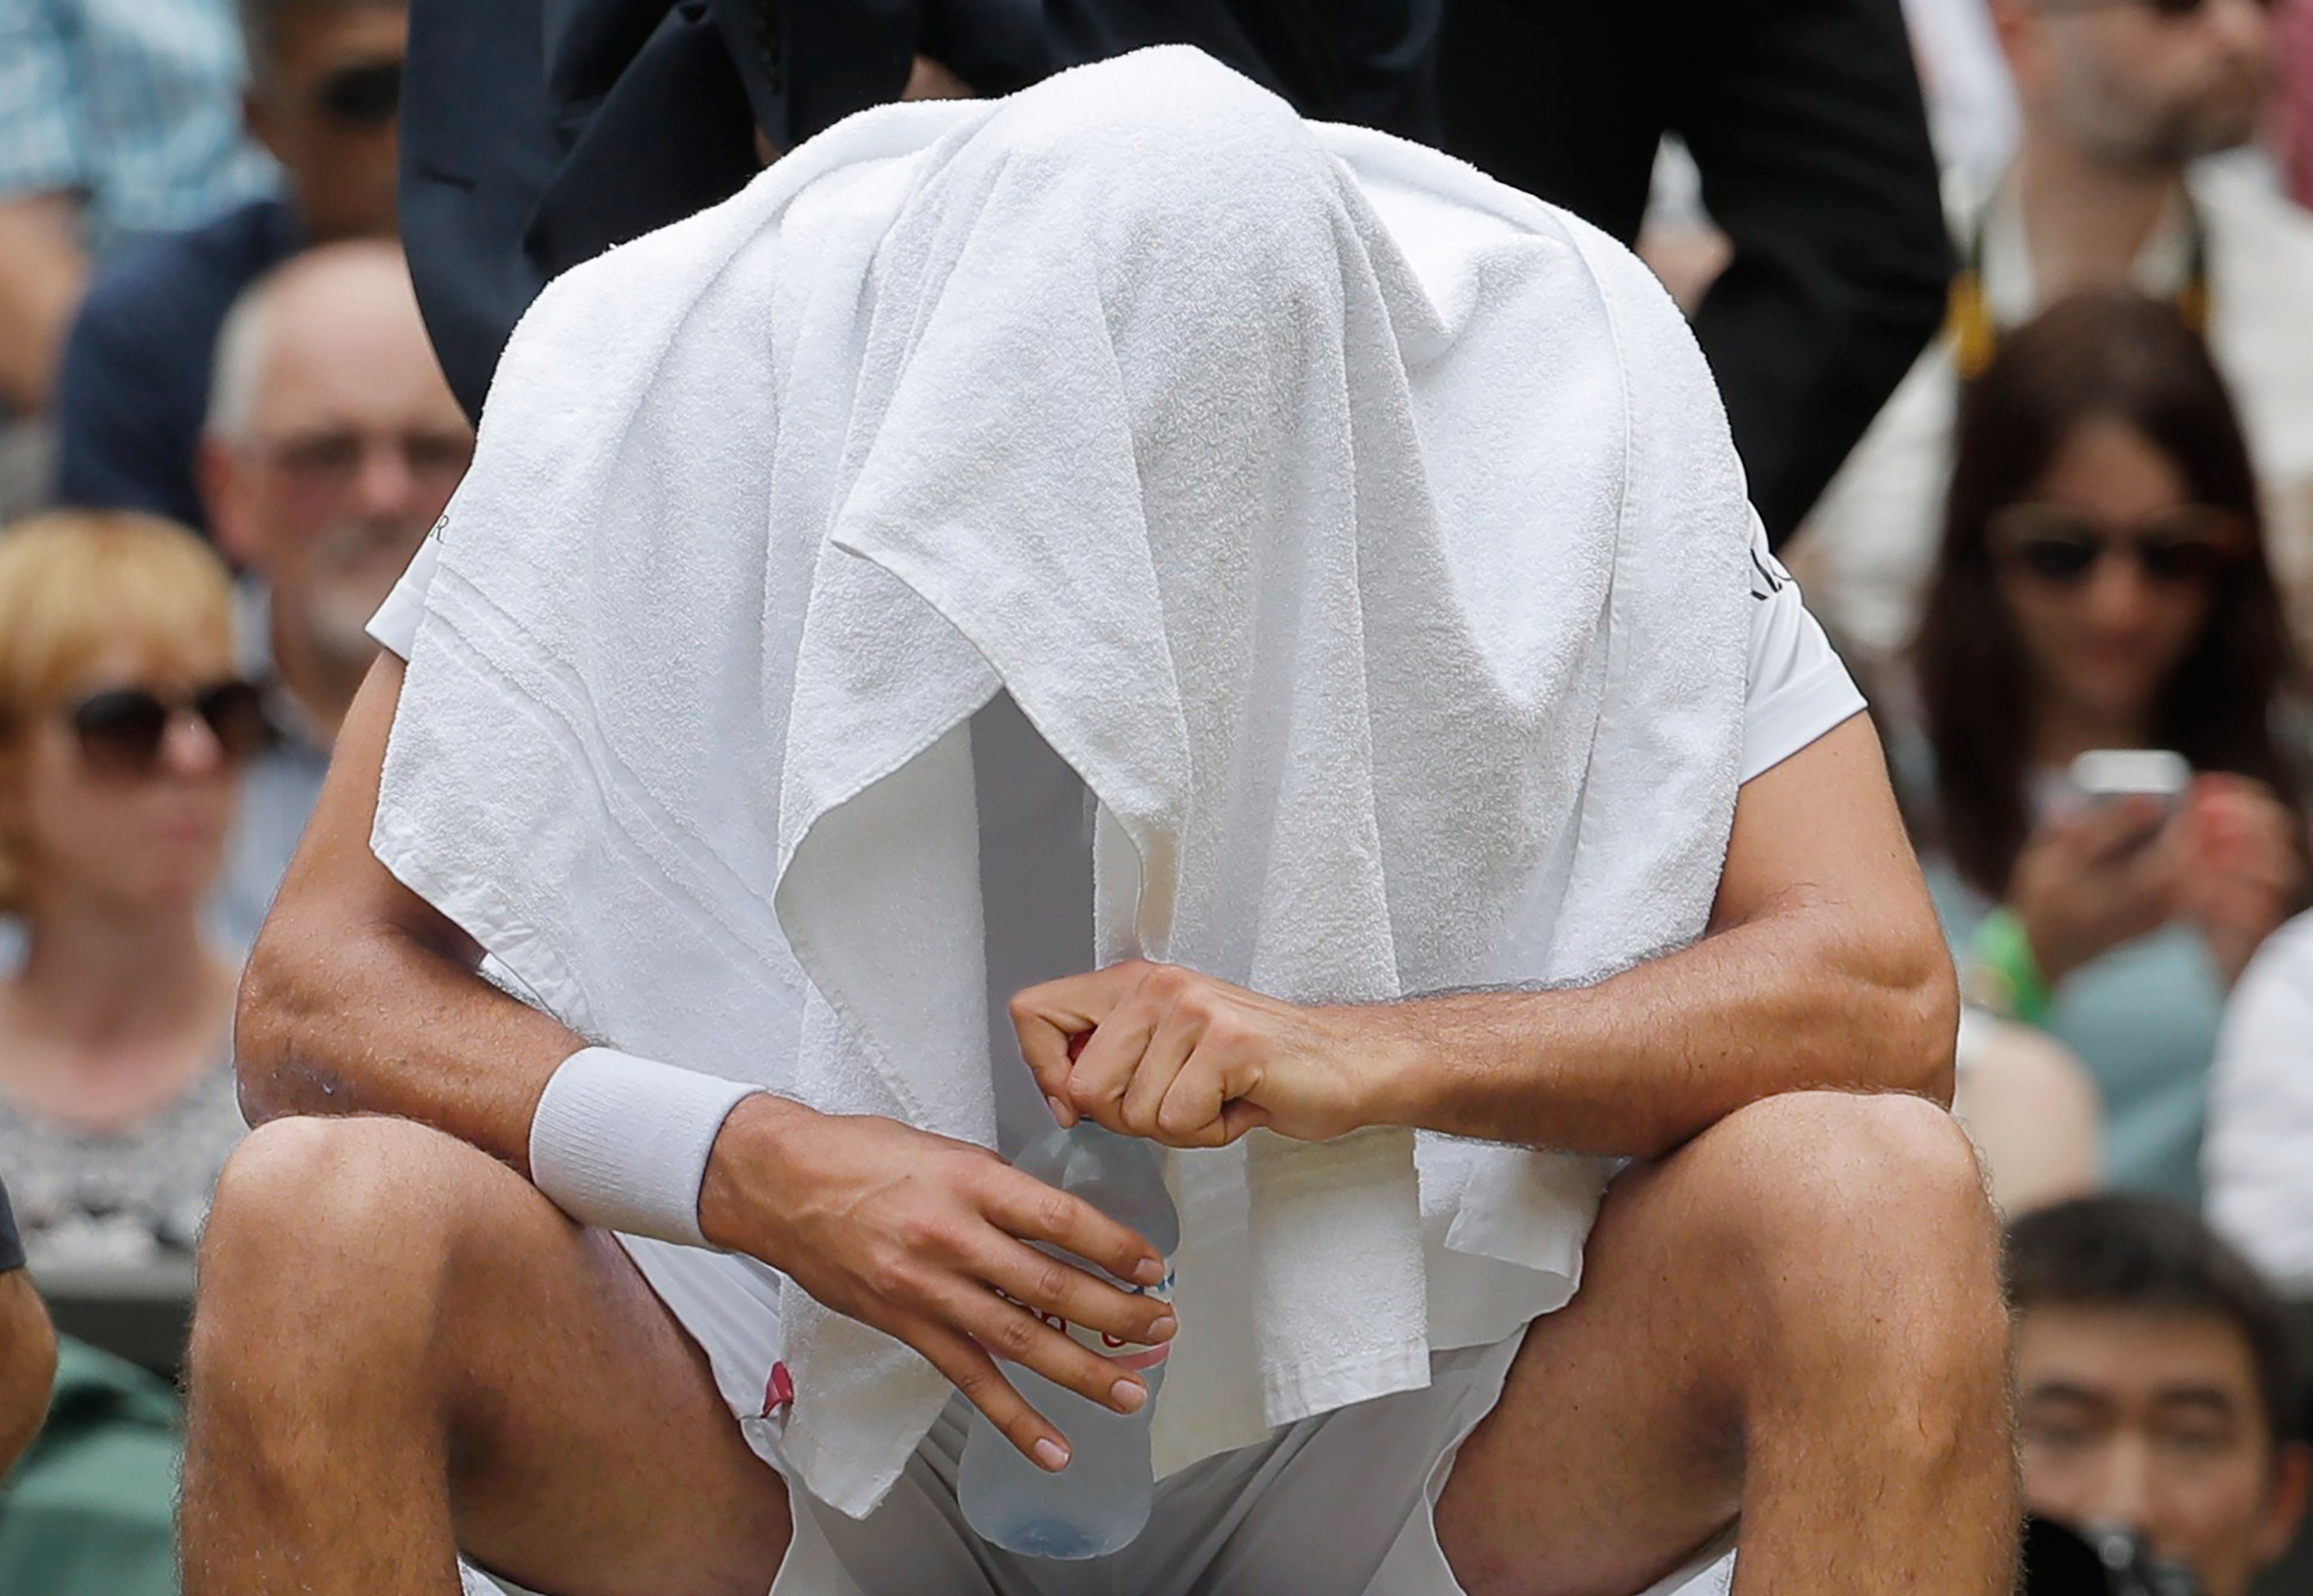 Marin Cilic broke down in tears during his loss to Roger Federer in the July 16 Wimbledon men’s final (Alastair Grant—AP)